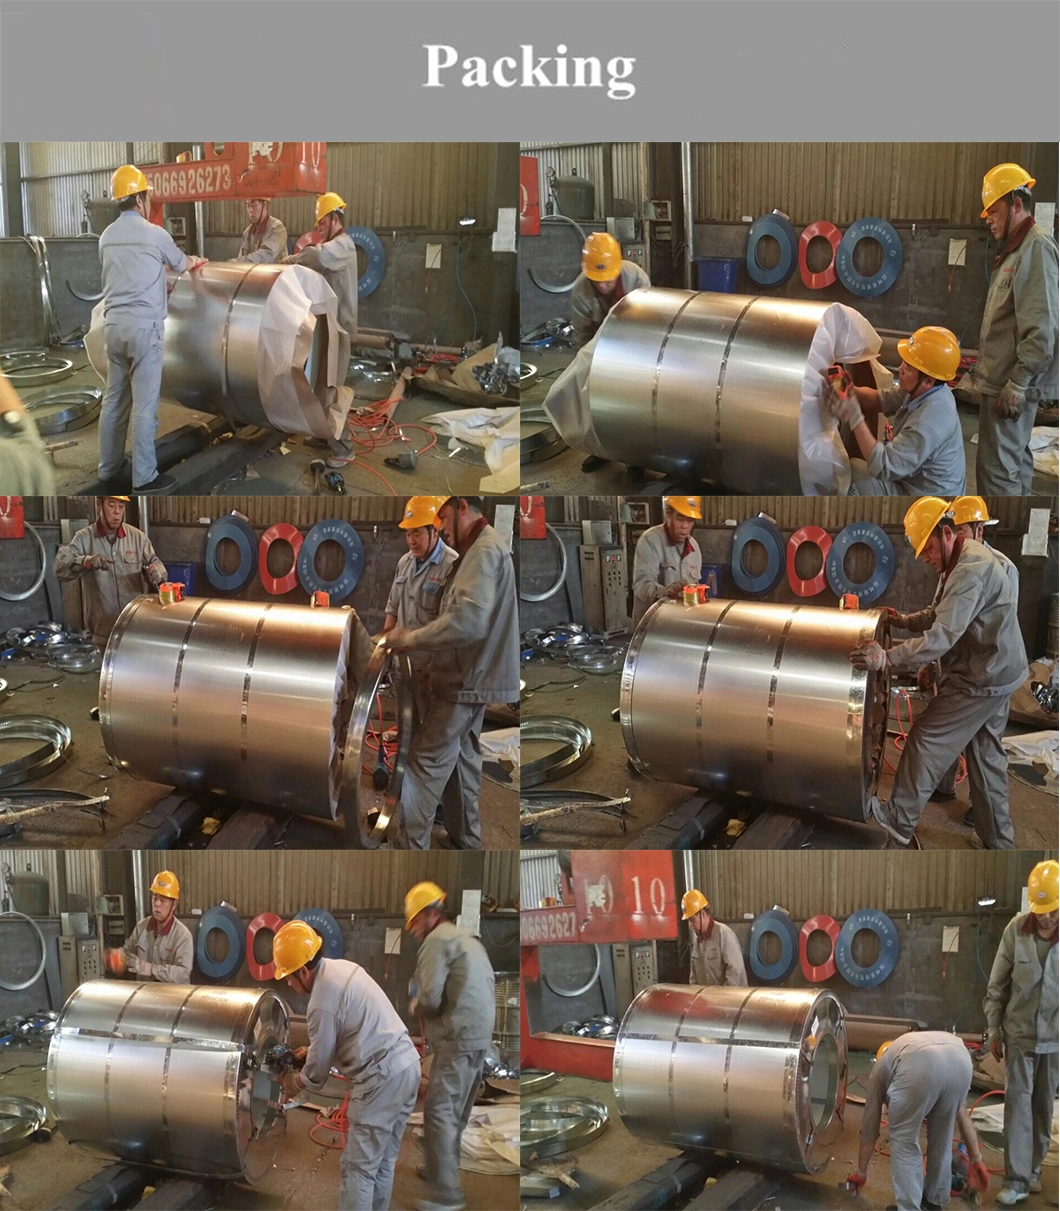 Building Material Cold Rolled Ss400 Carbon Steel Coil